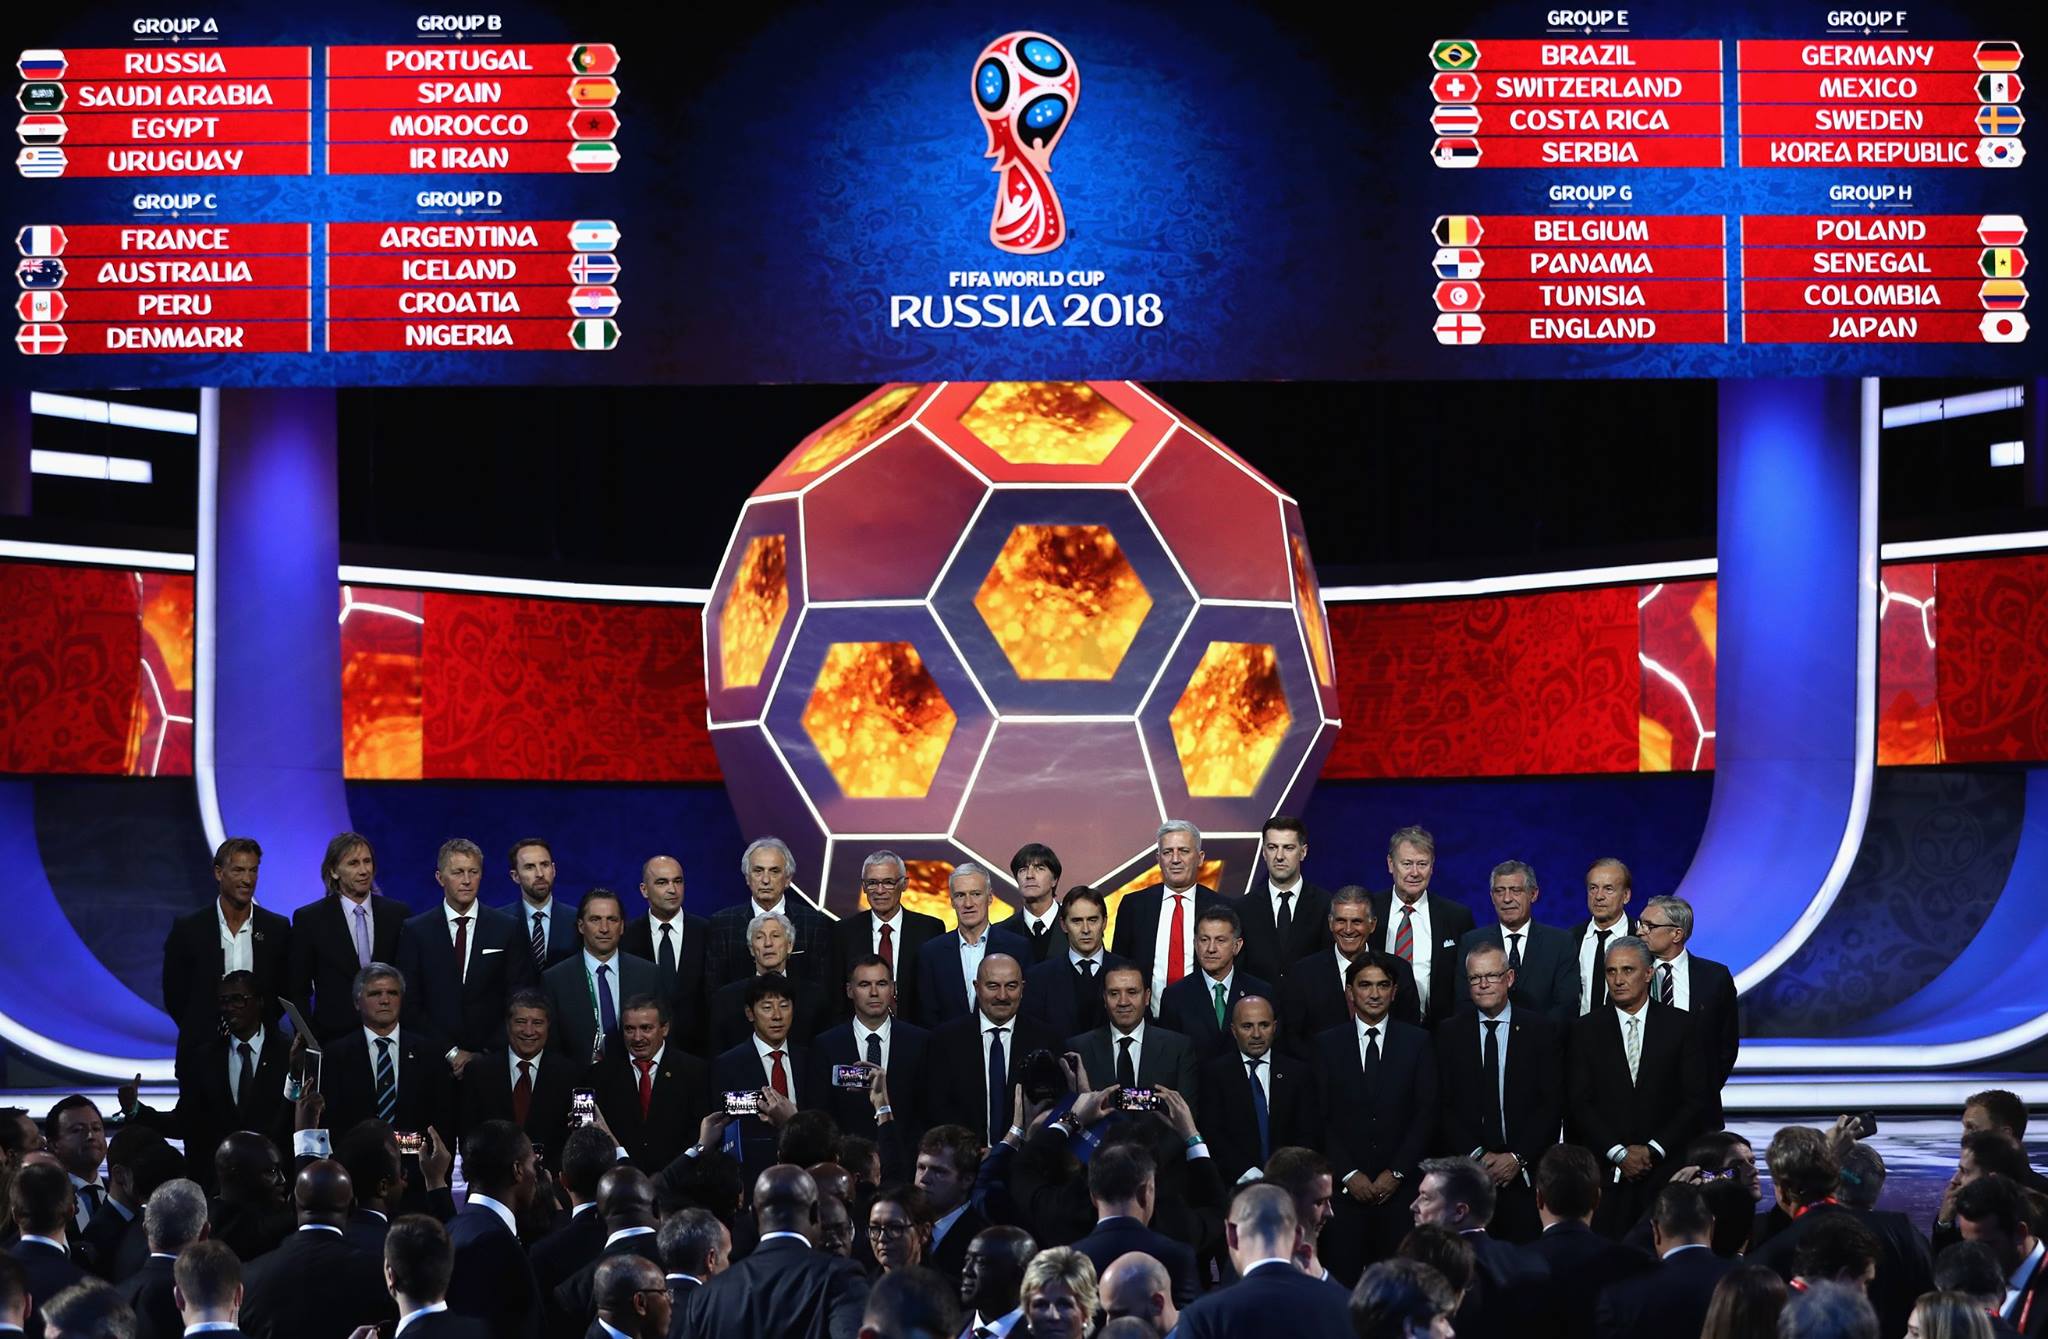 final-draw-of-the-fifa-world-cup-2018-in-russia-russia-travel-blog